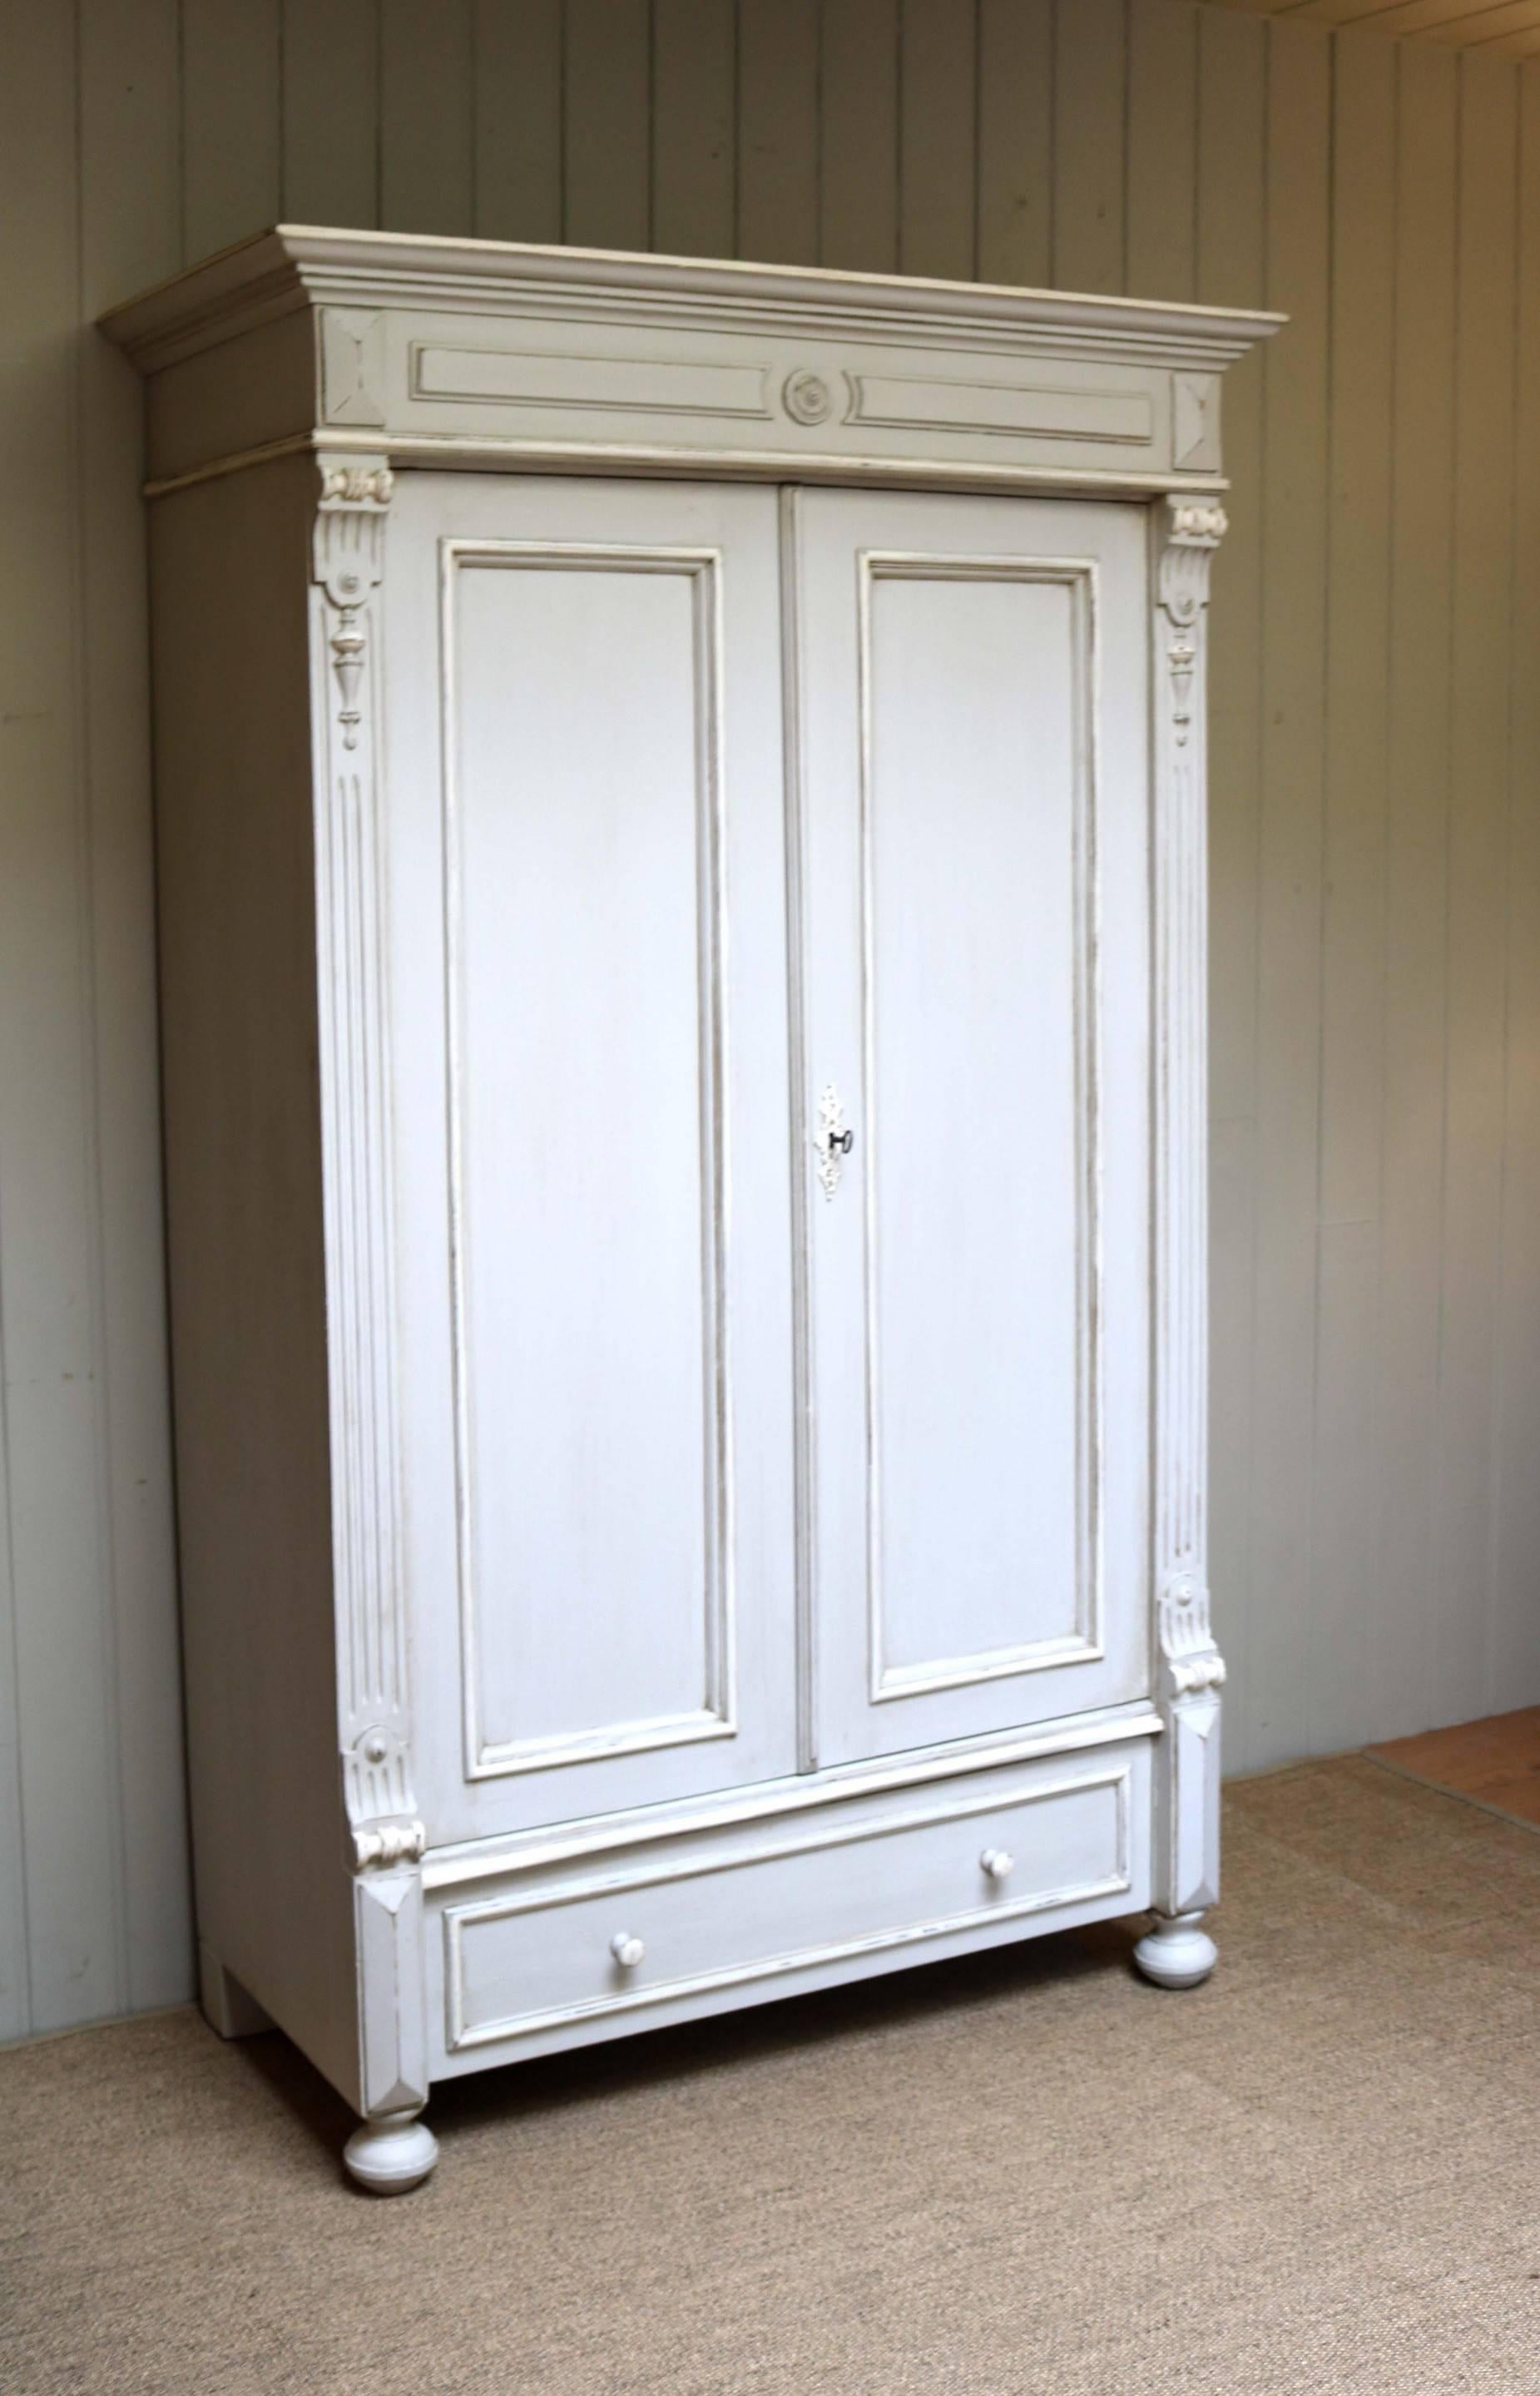 Continental painted pine two-door wardrobe having panelled doors with reeded side pilasters and a single base drawer fitted with an internal hanging rail. Measures: The internal depth is 44 cm,
East Europe, circa 1890.